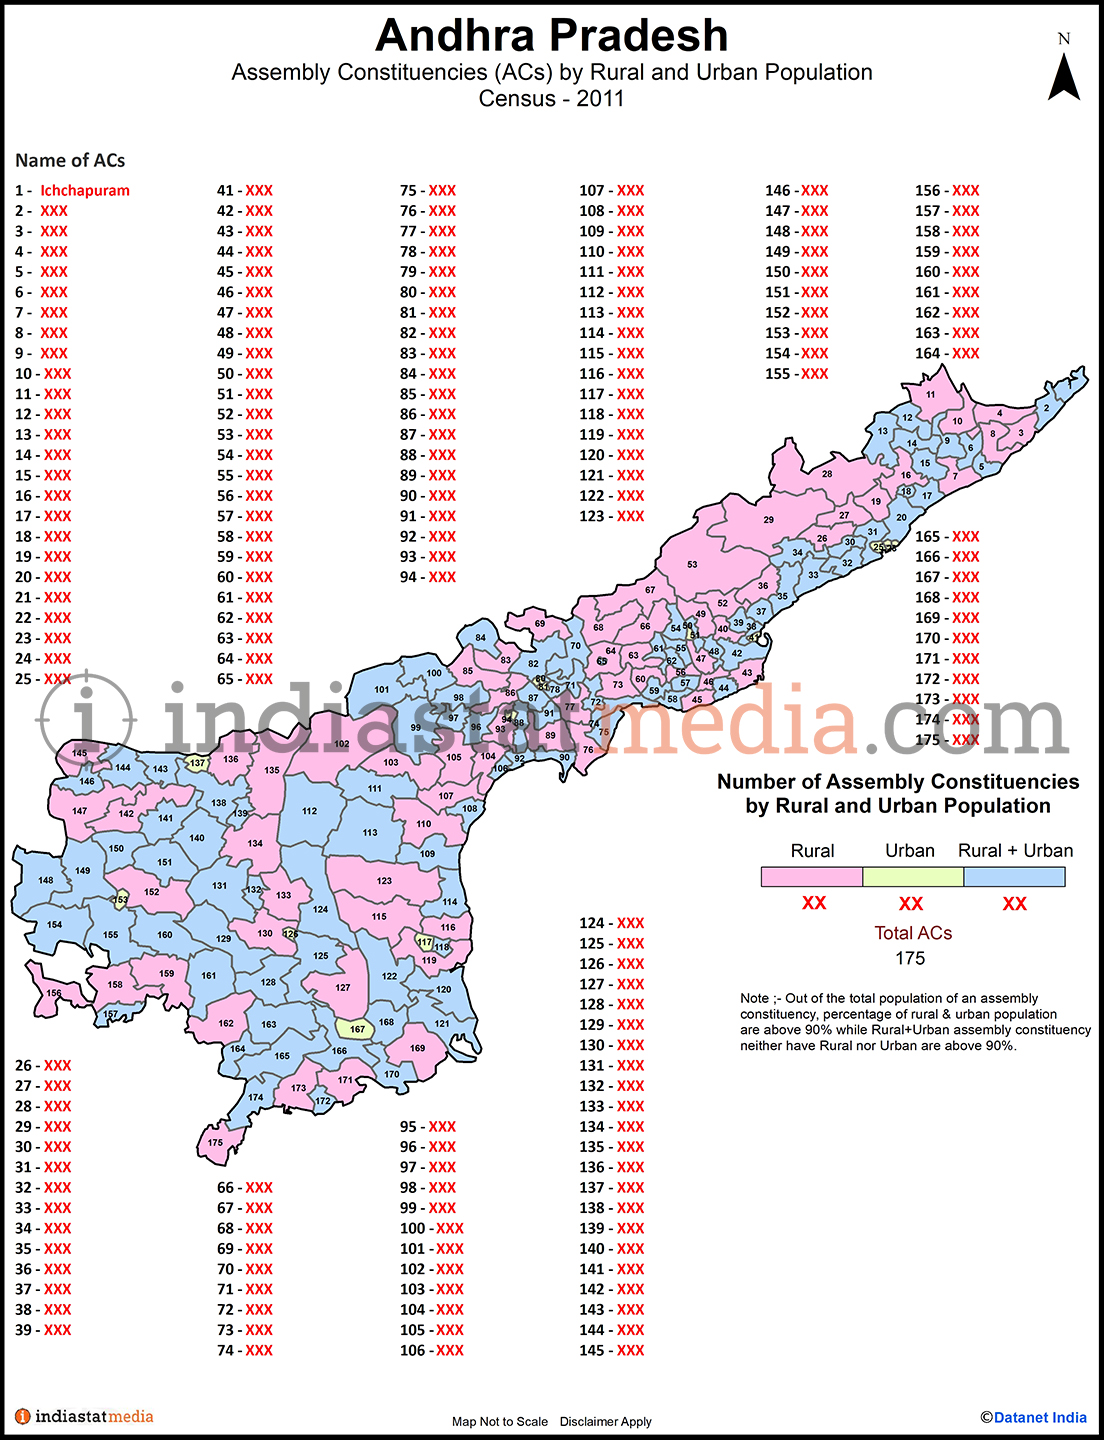 Assembly Constituencies by Rural and Urban Population in Andhra Pradesh - Census 2011